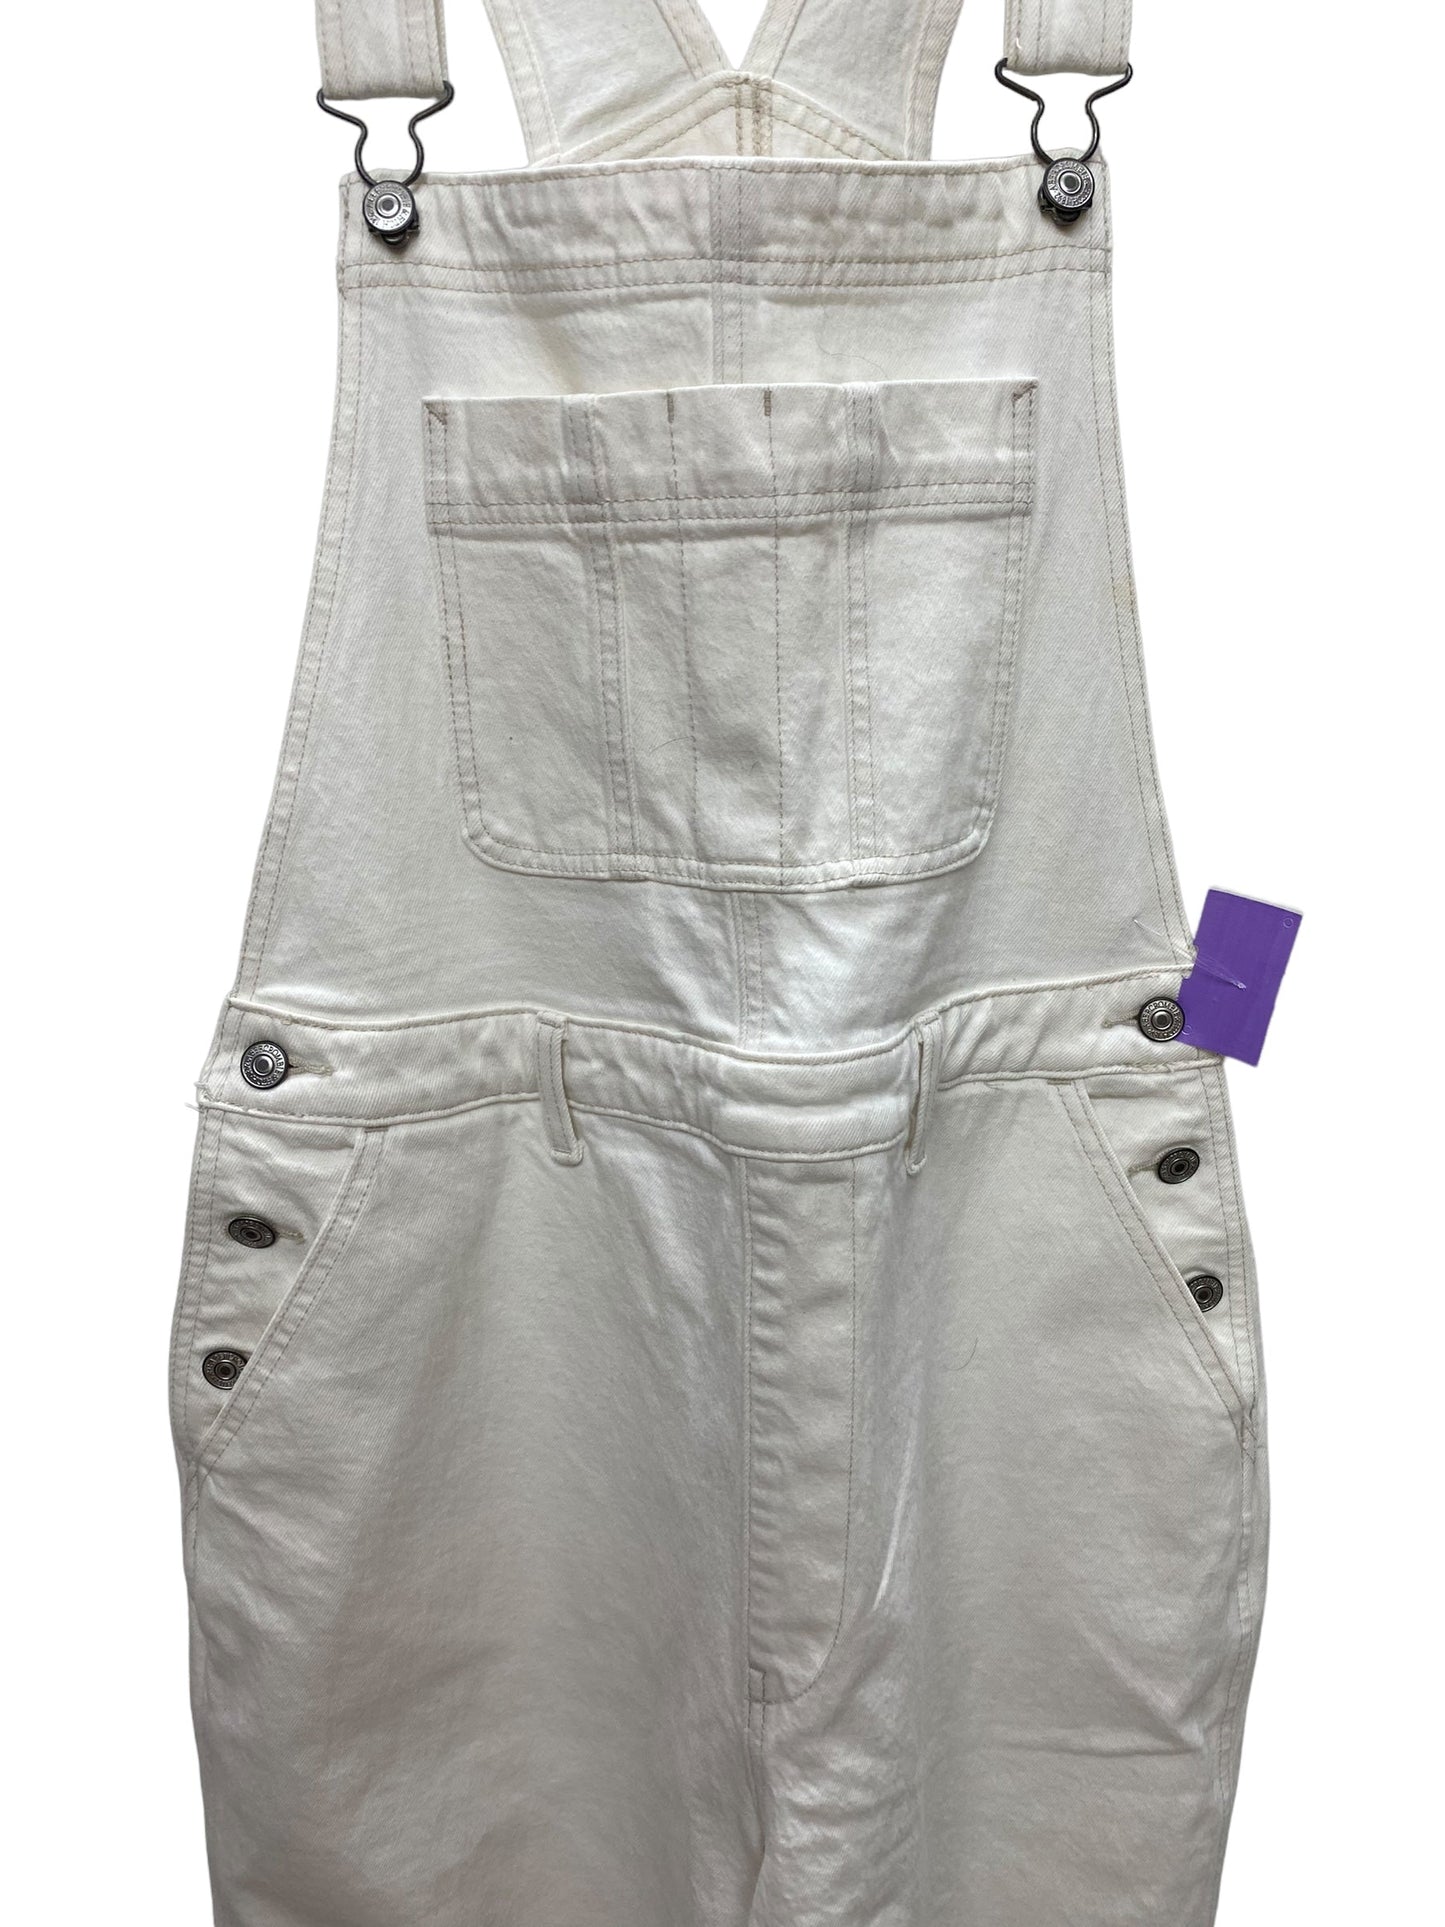 Overalls By Abercrombie And Fitch  Size: L